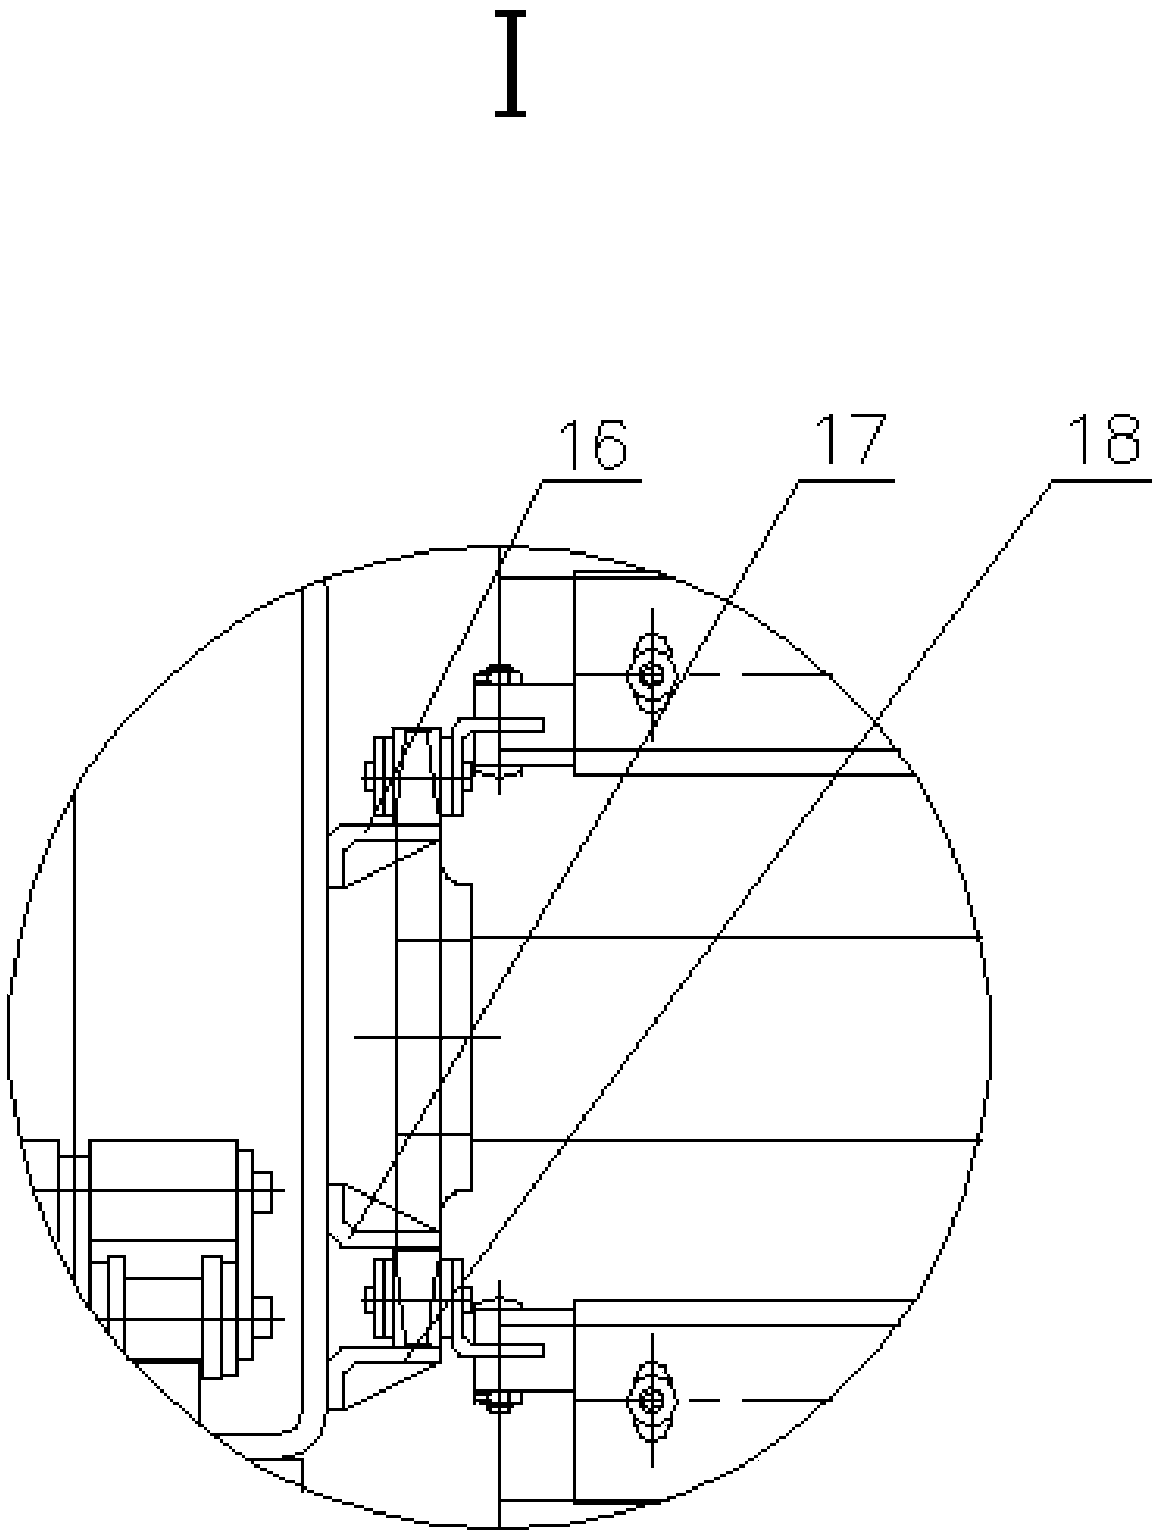 Vacuum pre-conditioner with automatic drainage device